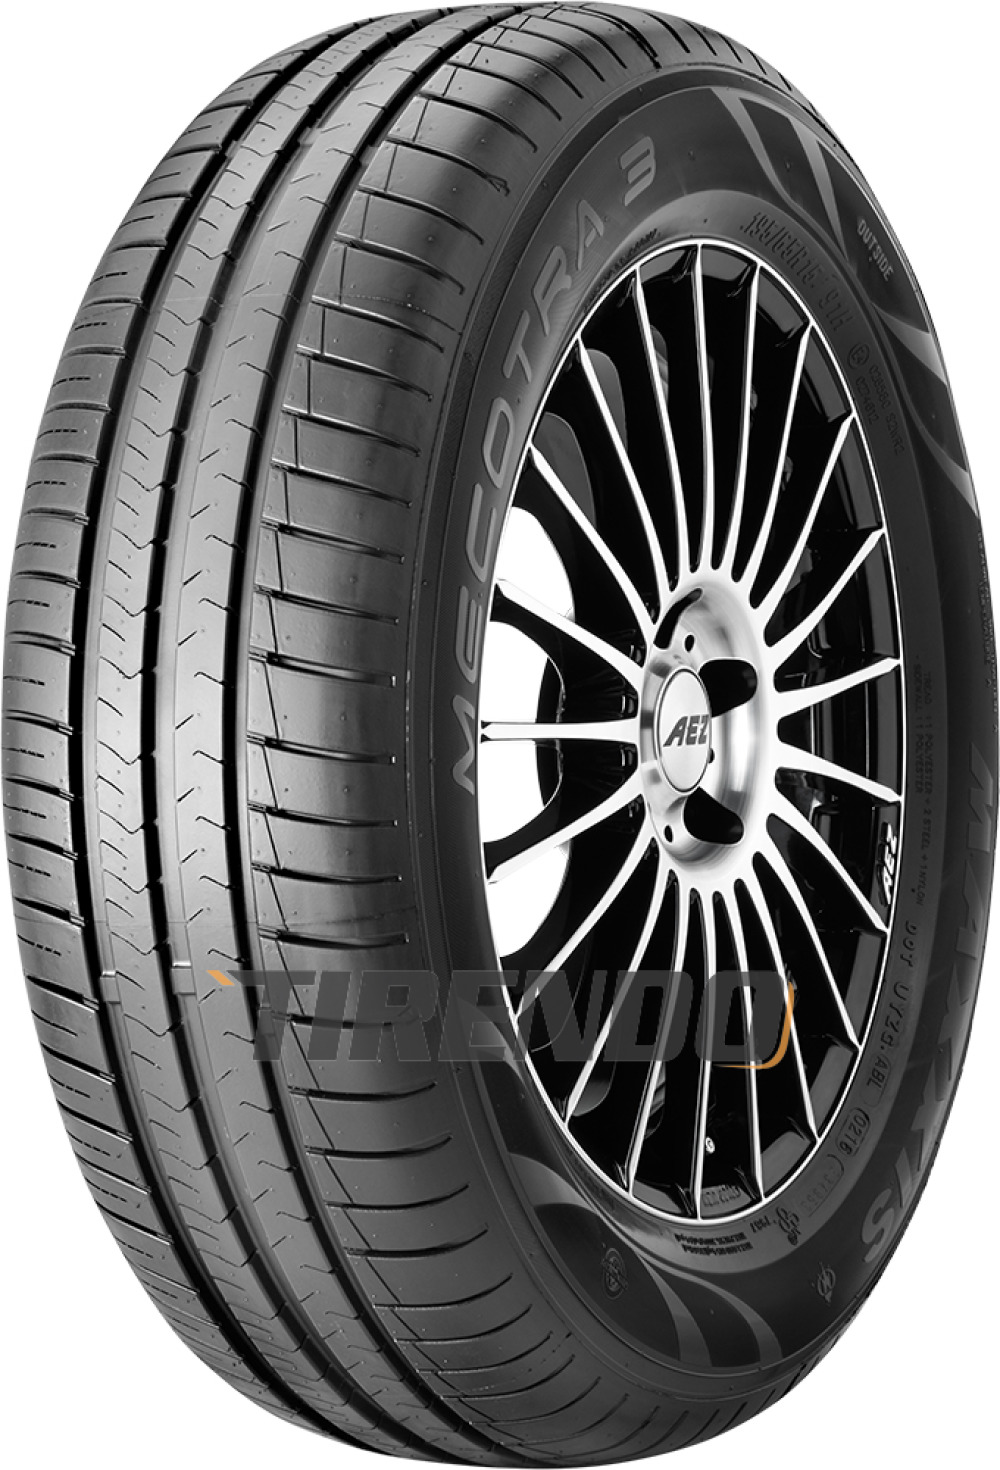 Maxxis Mecotra 3 ( 175/70 R13 82T ) von Maxxis